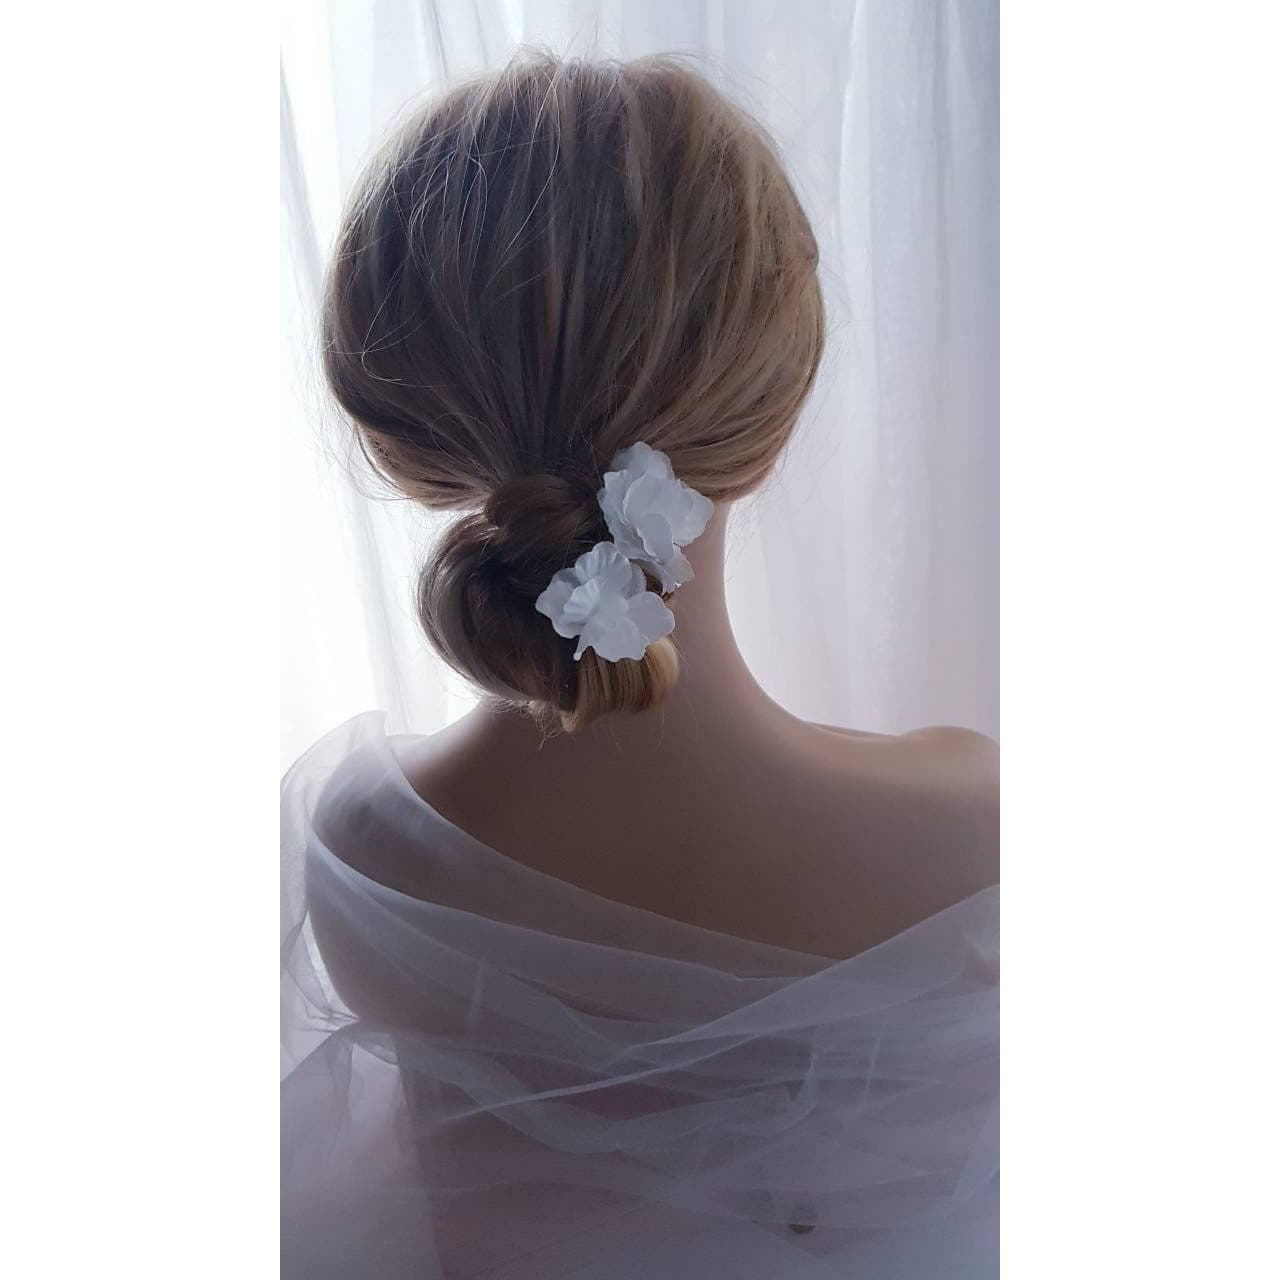 ANGE WHITE flower hairpin set hair accessories bridal updos wedding hairstyling classic weddings accessories handcrafted hairpins decorative